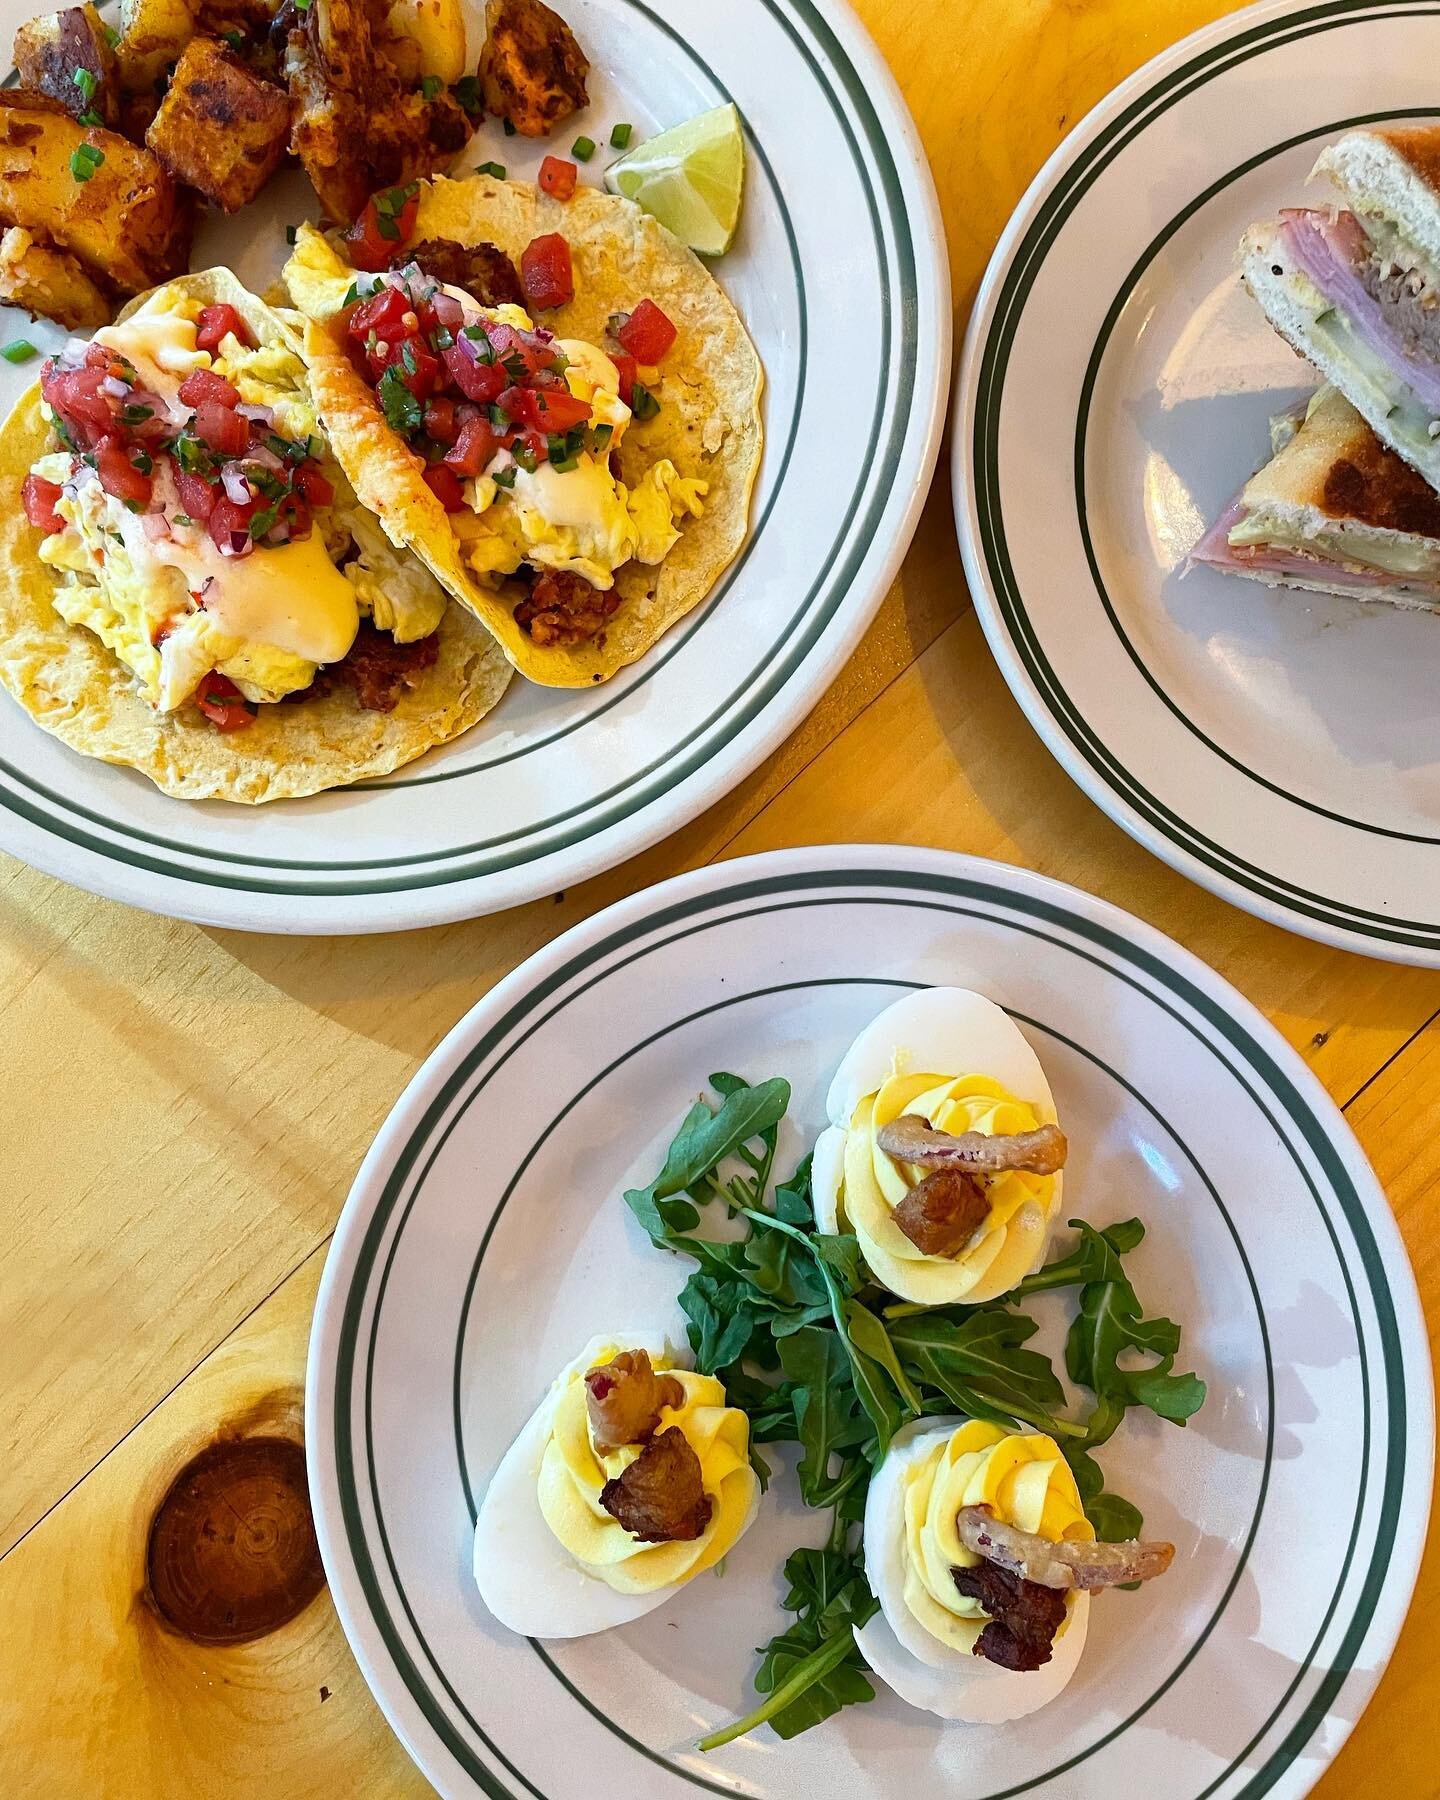 Deviled duck eggs, breakfast tacos, Cubanos, oh my! Check out our specials this weekend 🤜🏽🤜🏽